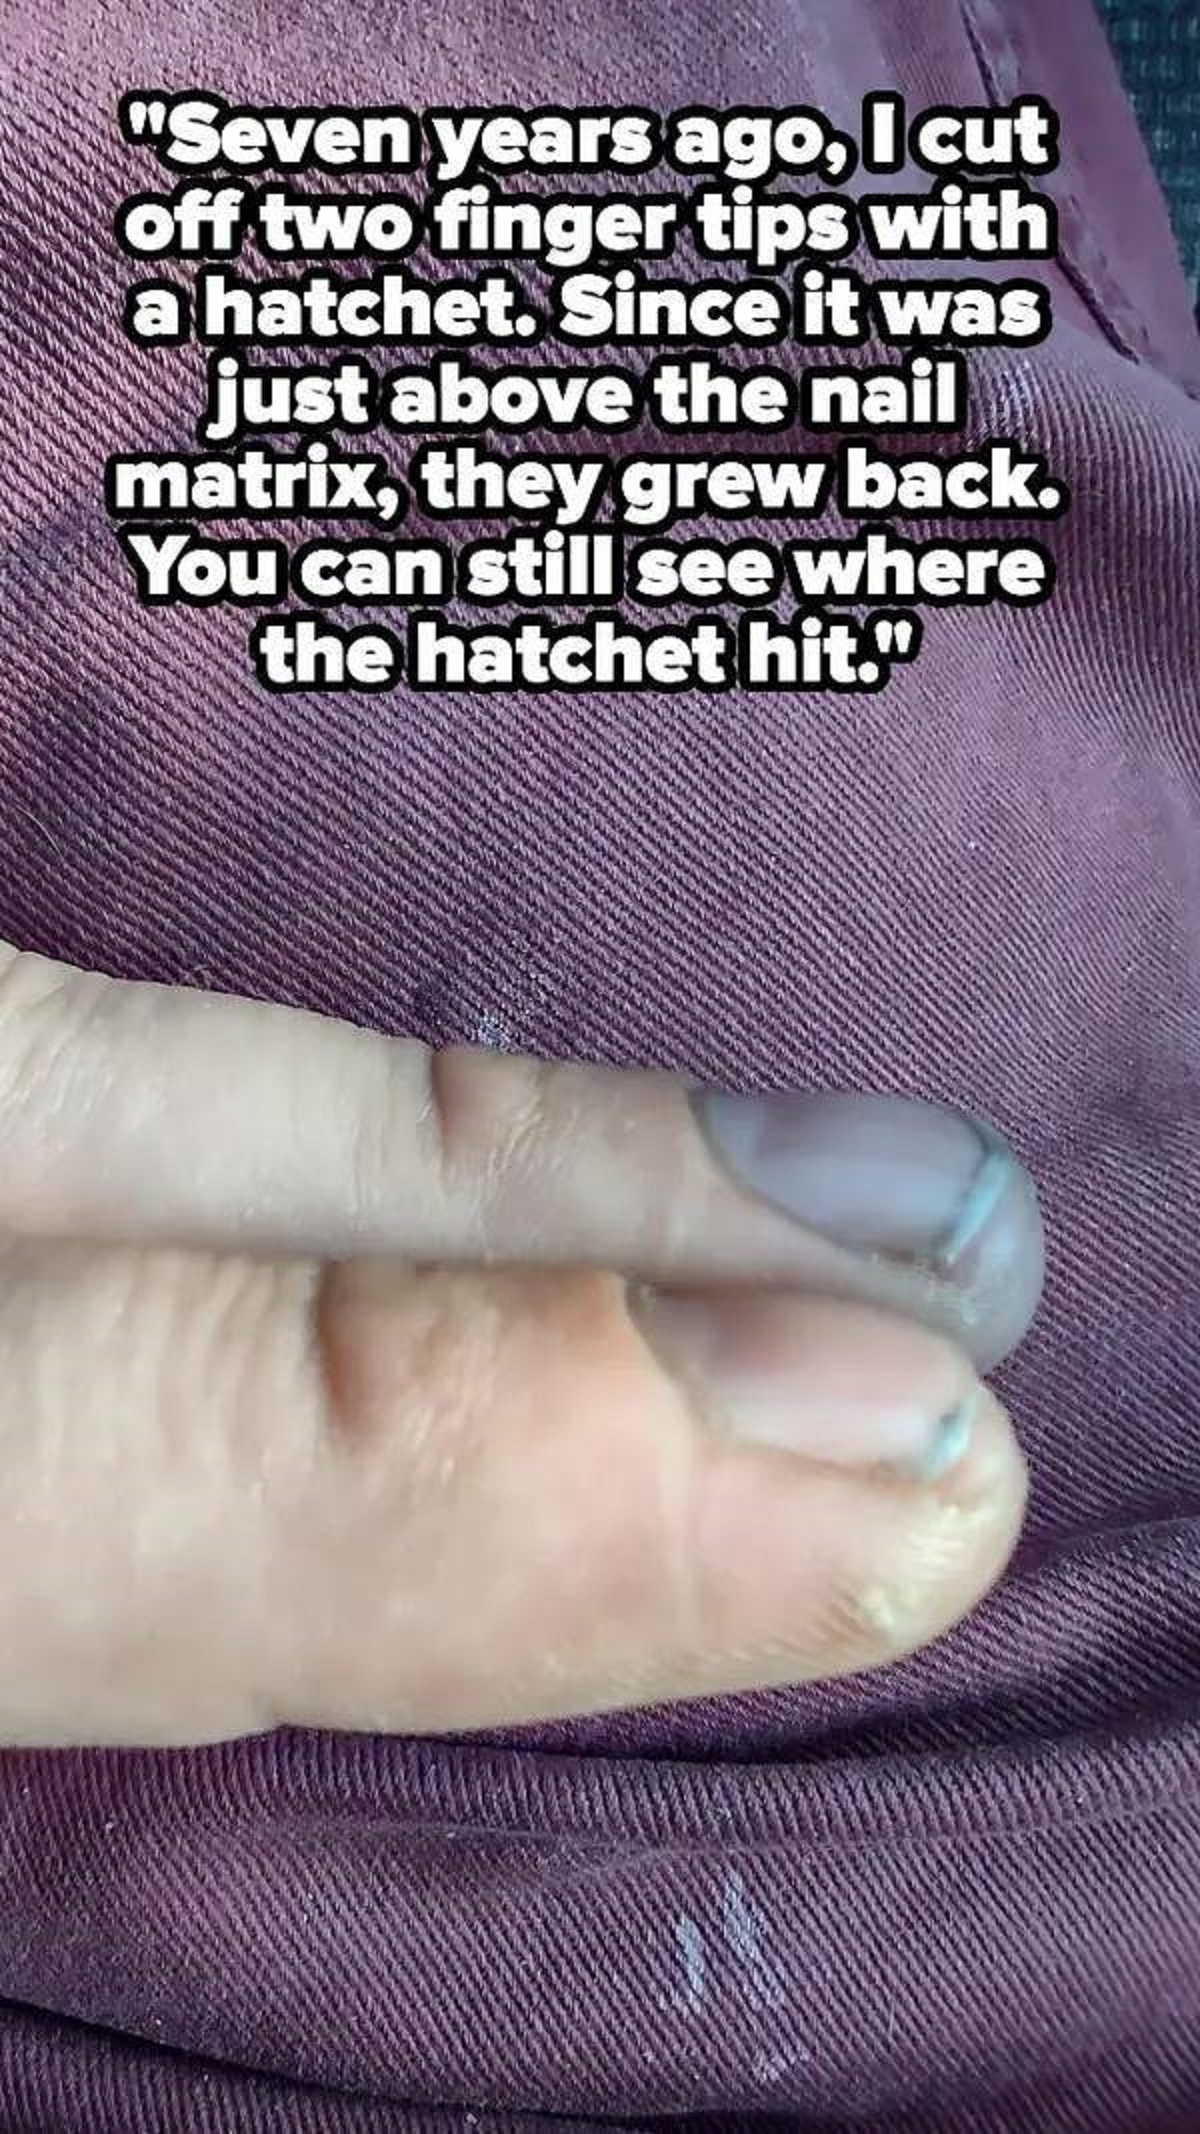 fascinating photos - hand - "Seven years ago, I cut off two finger tips with a hatchet. Since it was just above the nail matrix, they grew back. You can still see where the hatchet hit."